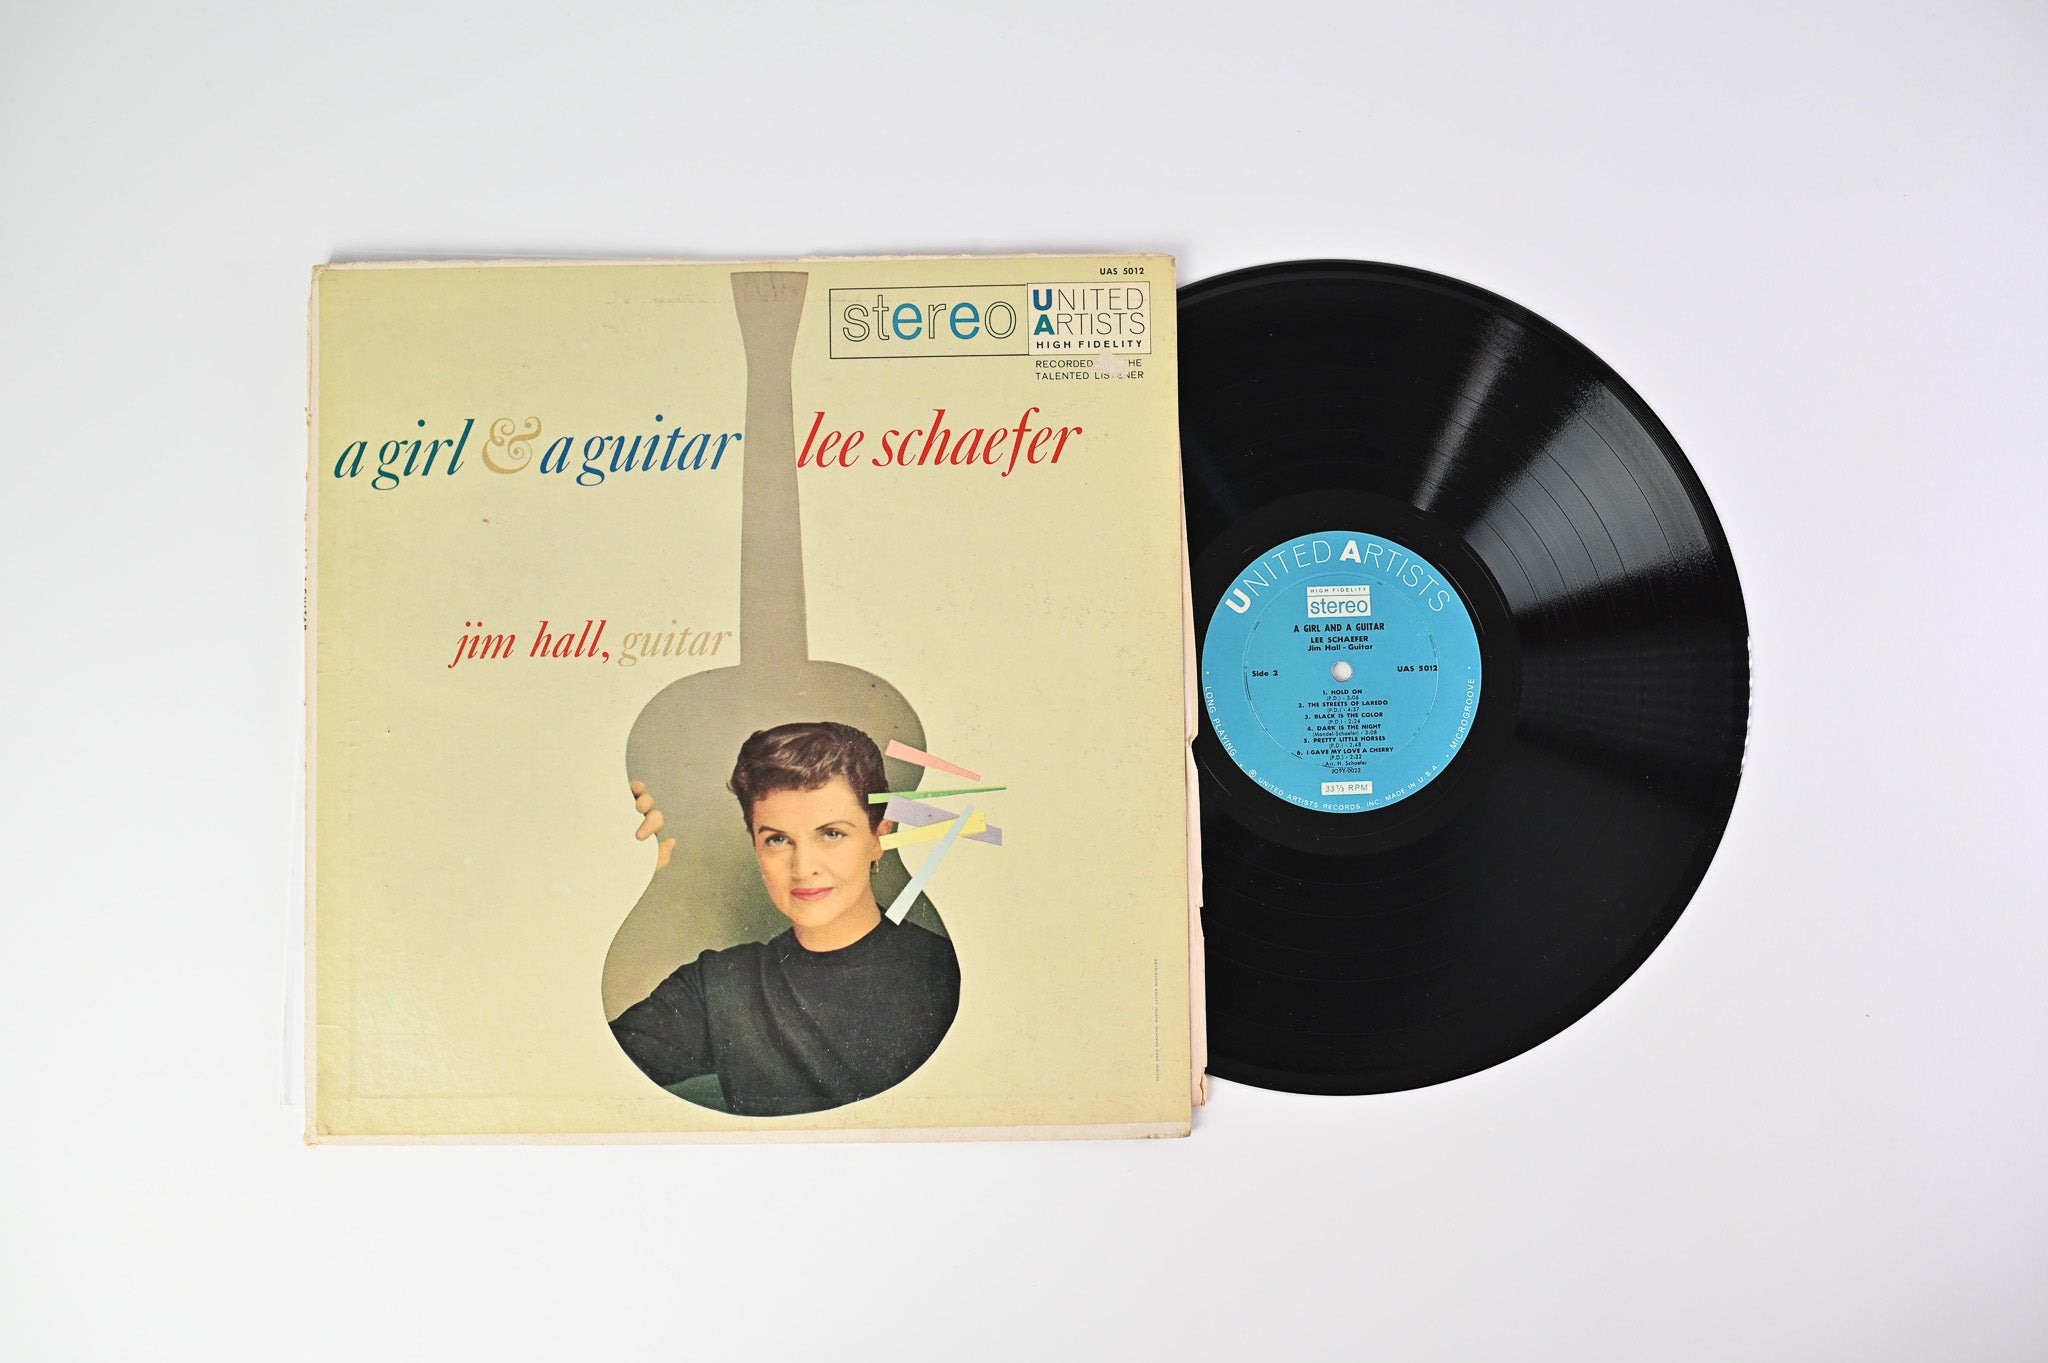 Jim Hall - A Girl And A Guitar on United Artists Records Stereo